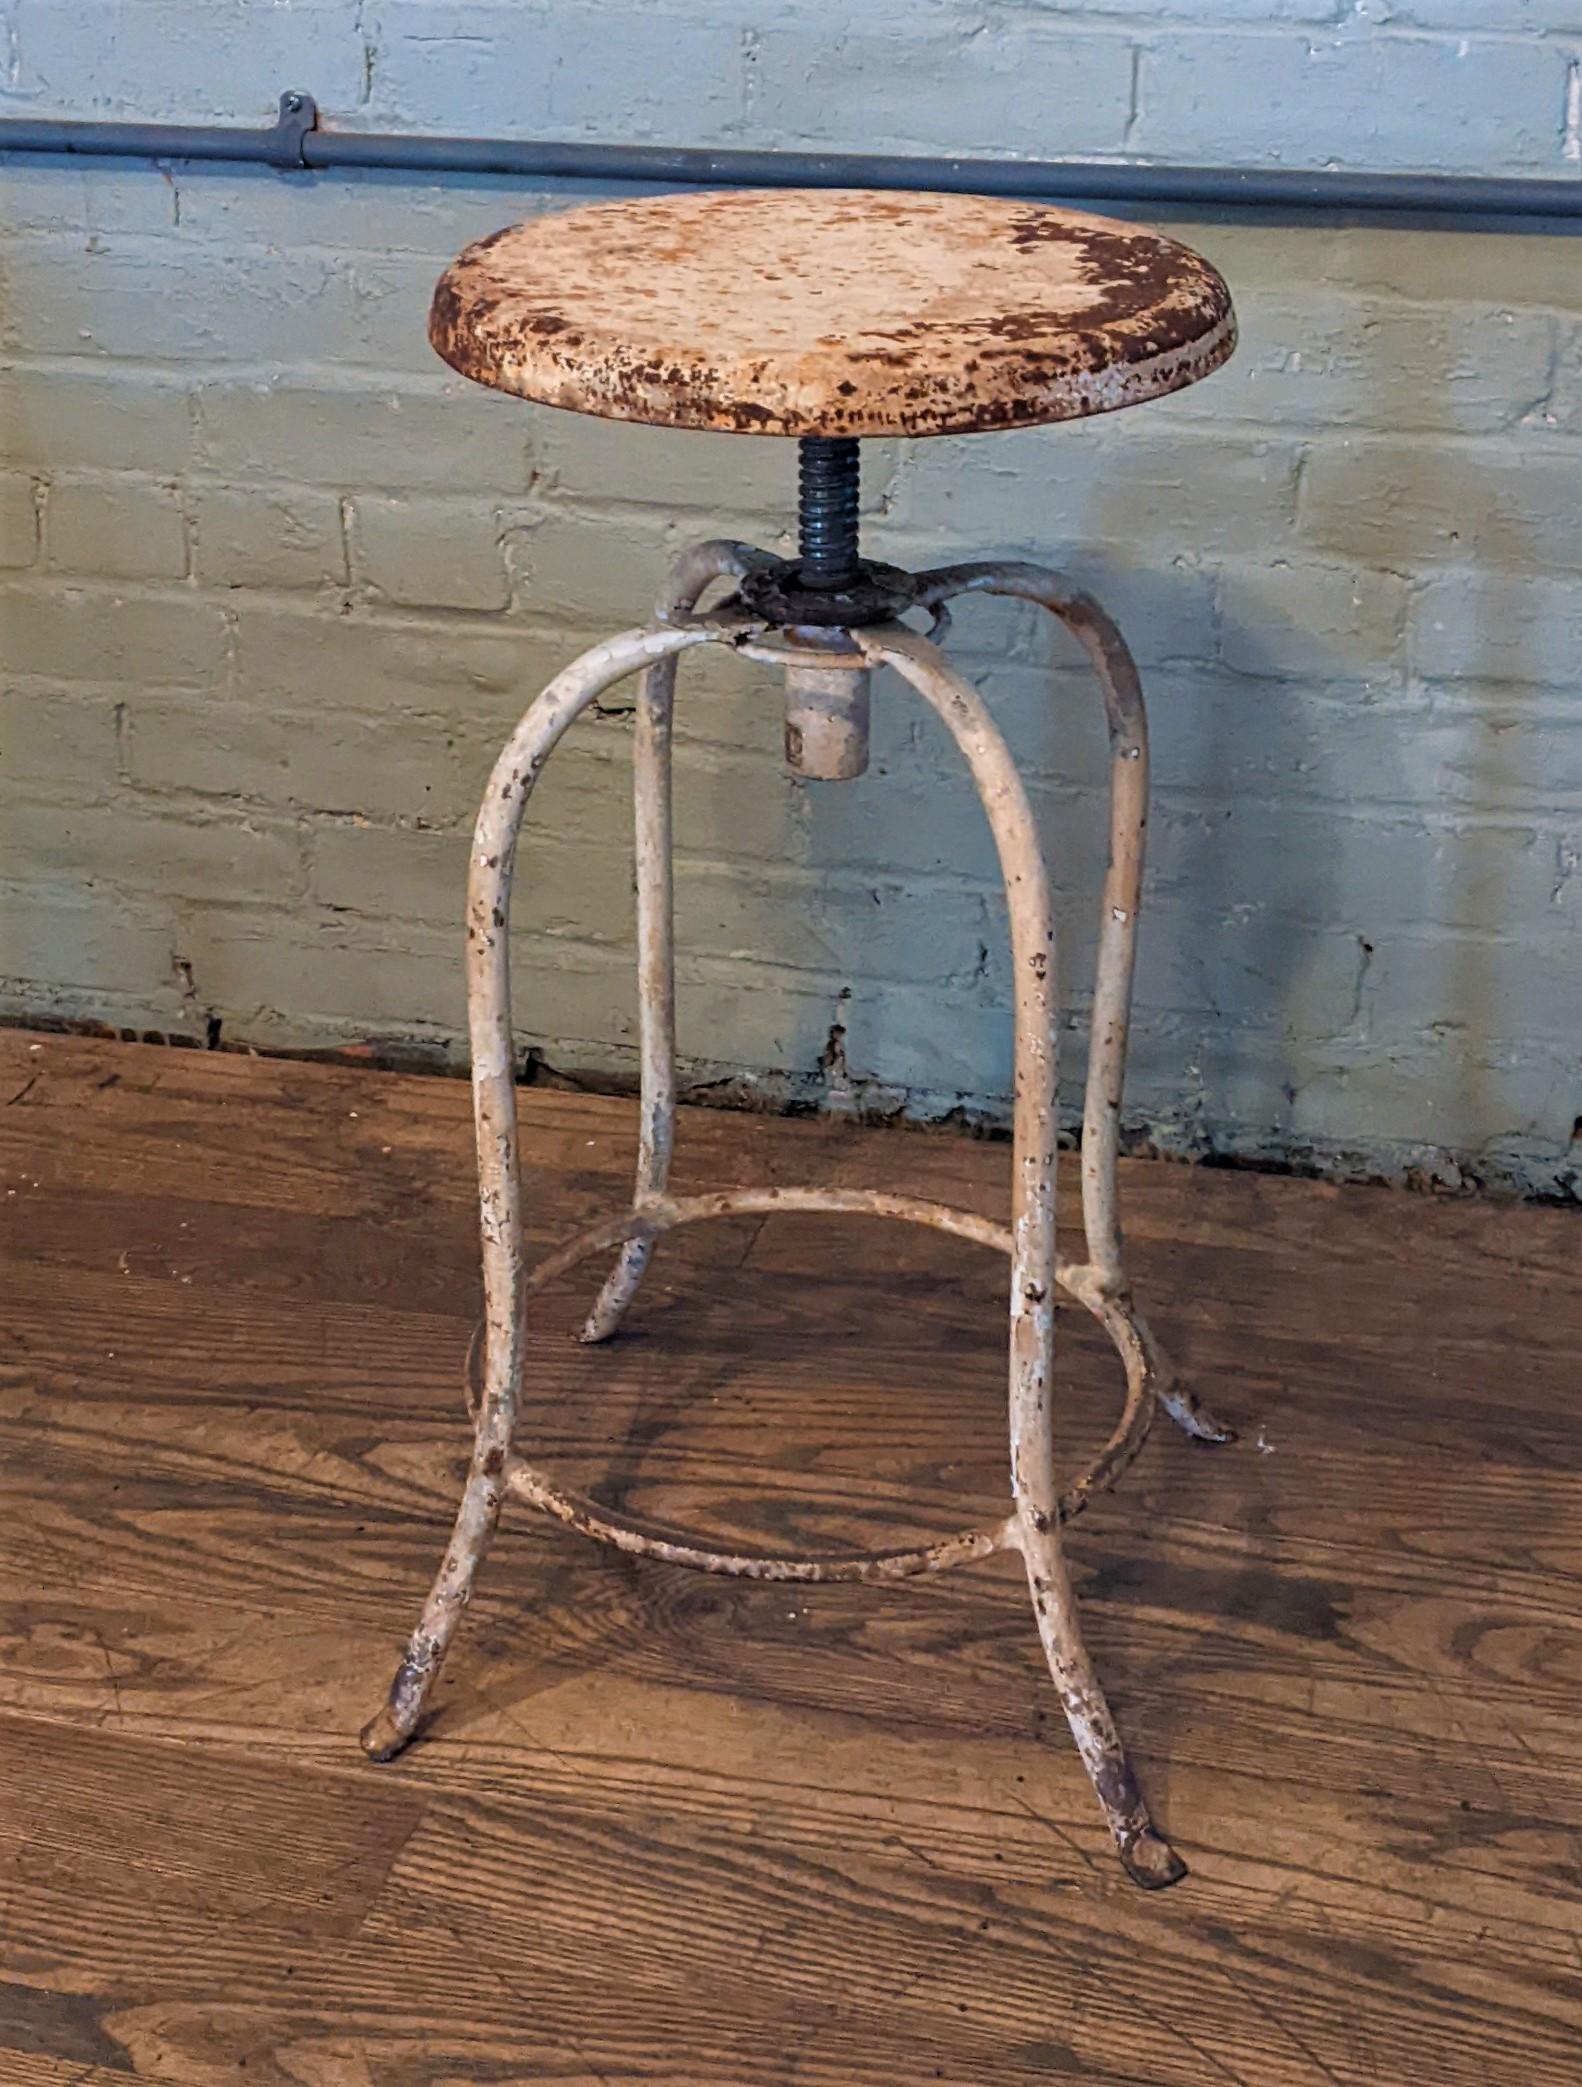 Old distressed medical stool.

Overall dimensions: 14